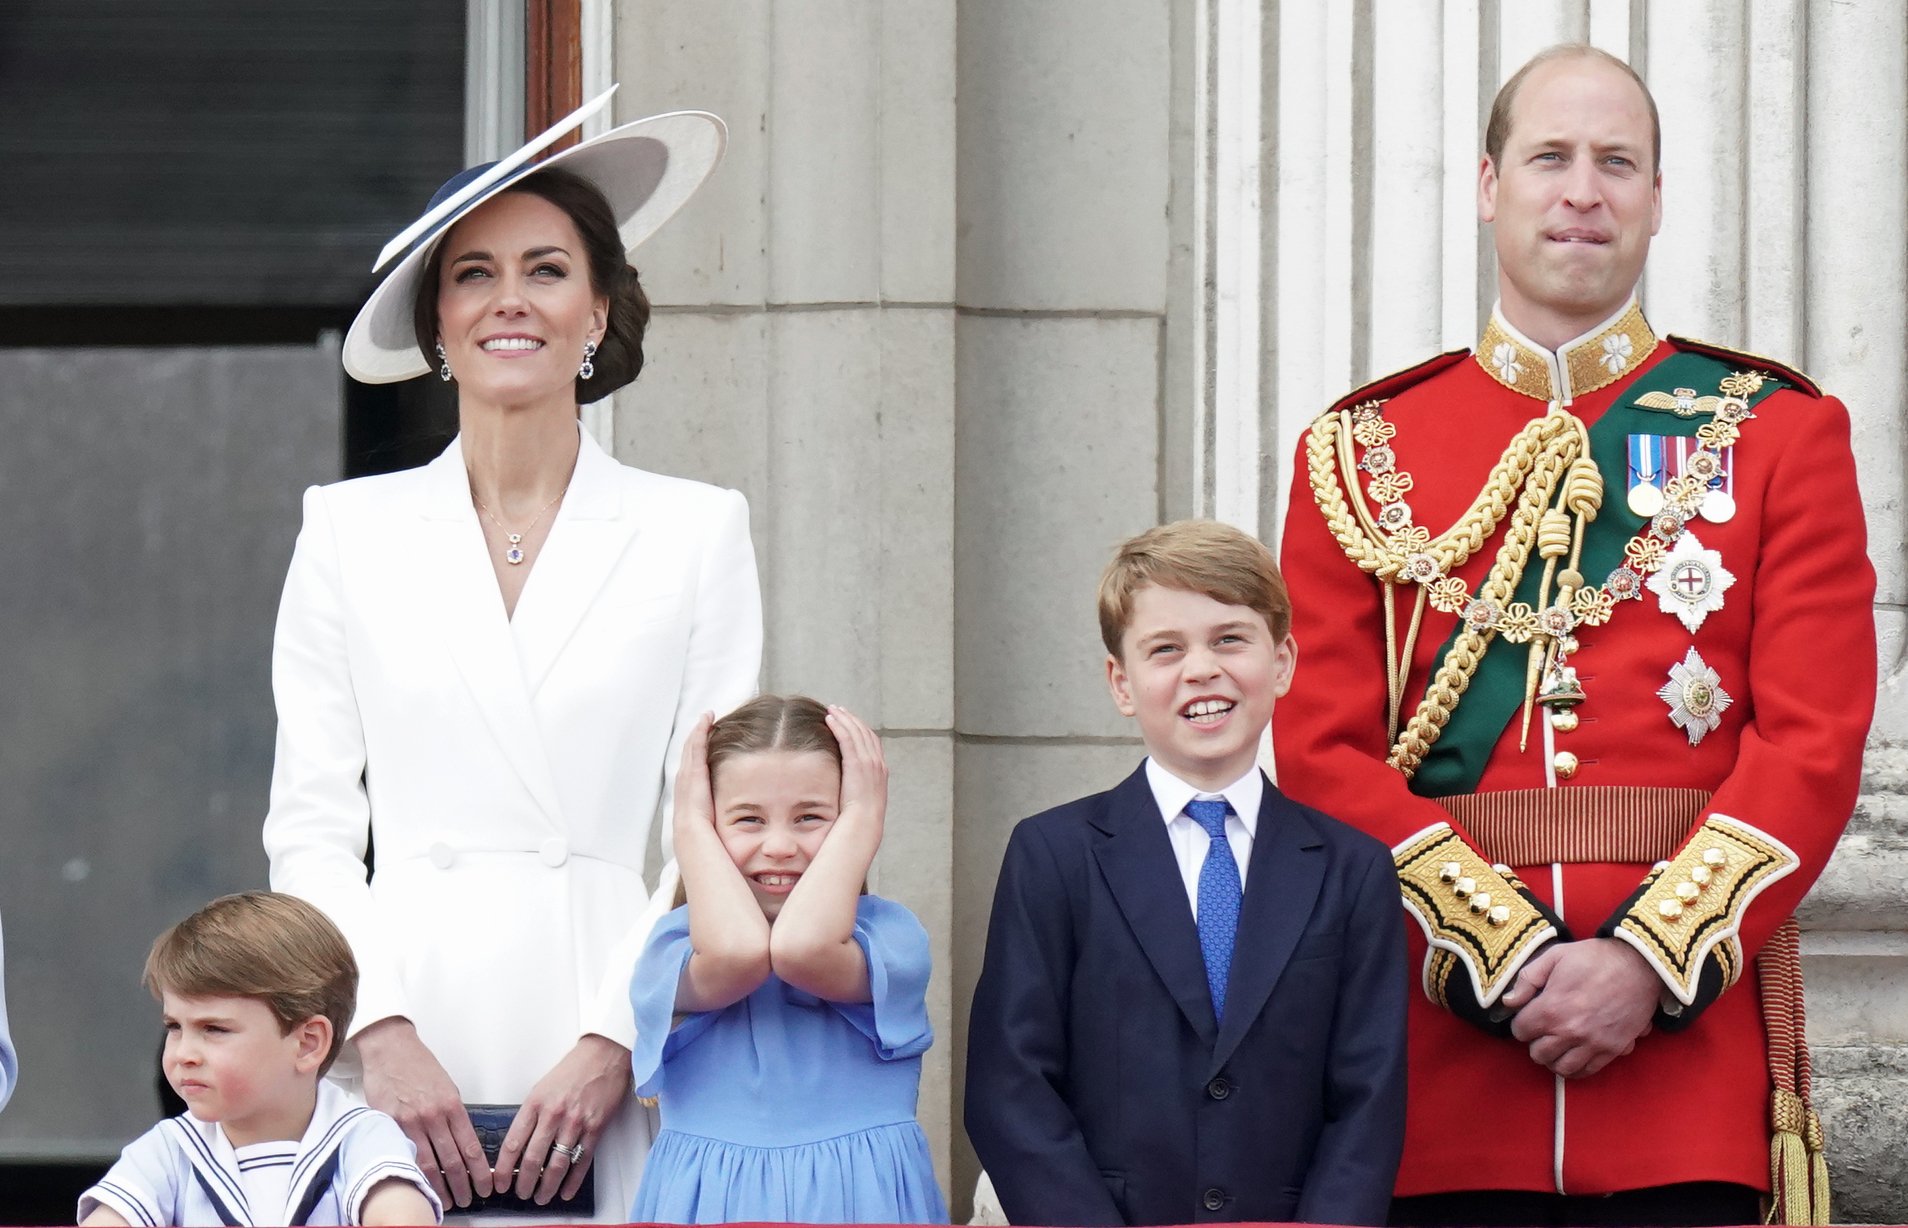 Prince Louis of Cambridge, Catherine, Duchess of Cambridge, Princess Charlotte of Cambridge, Prince George of Cambridge and Prince William, Duke of Cambridge watch the RAF flypast on the balcony of Buckingham Palace during the Trooping the Colour parade on June 02, 2022 in London, England. | Source: Getty Images